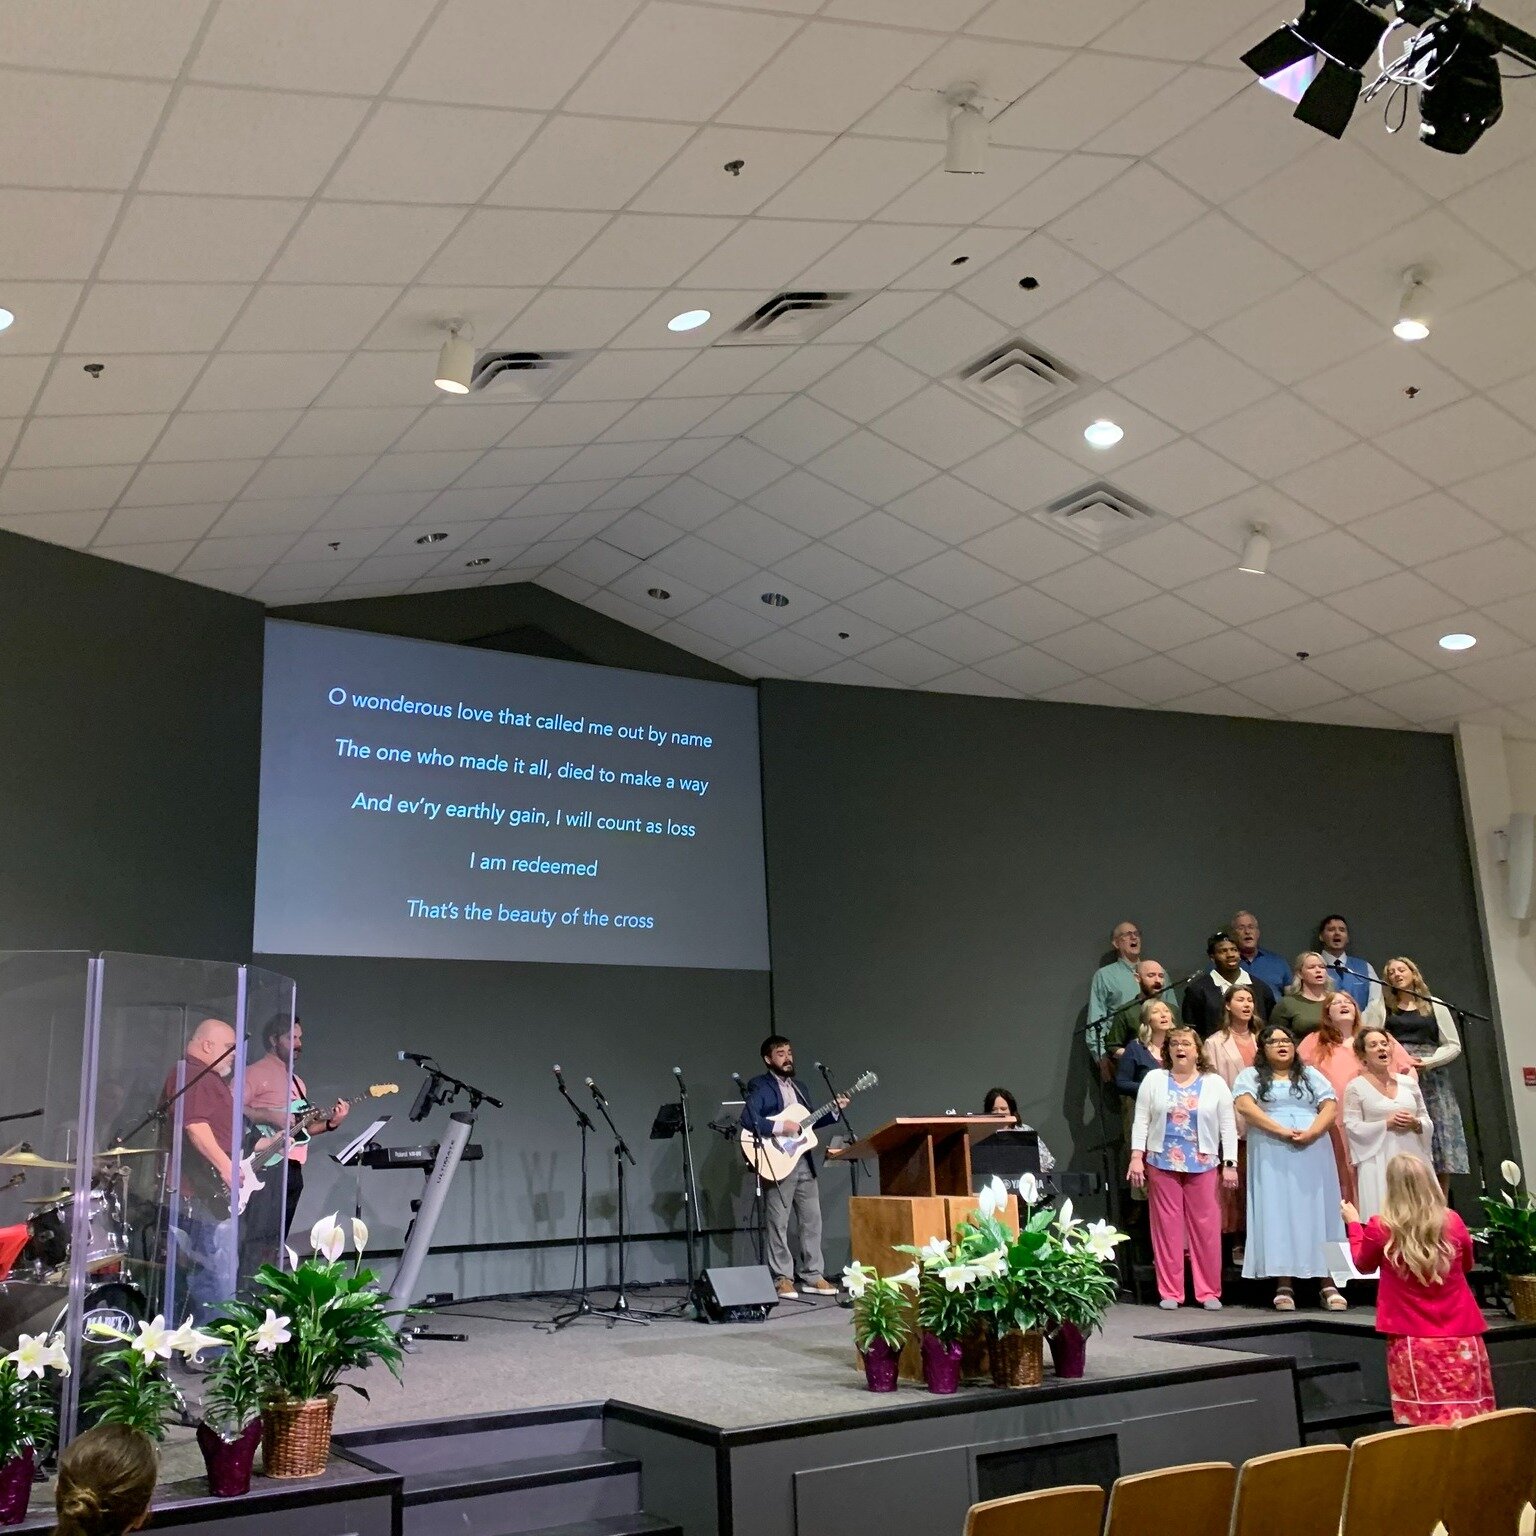 Our Easter services focused on Christ, the only way to salvation!

Sermon link: https://www.youtube.com/watch?v=RoPfaBwoXT4